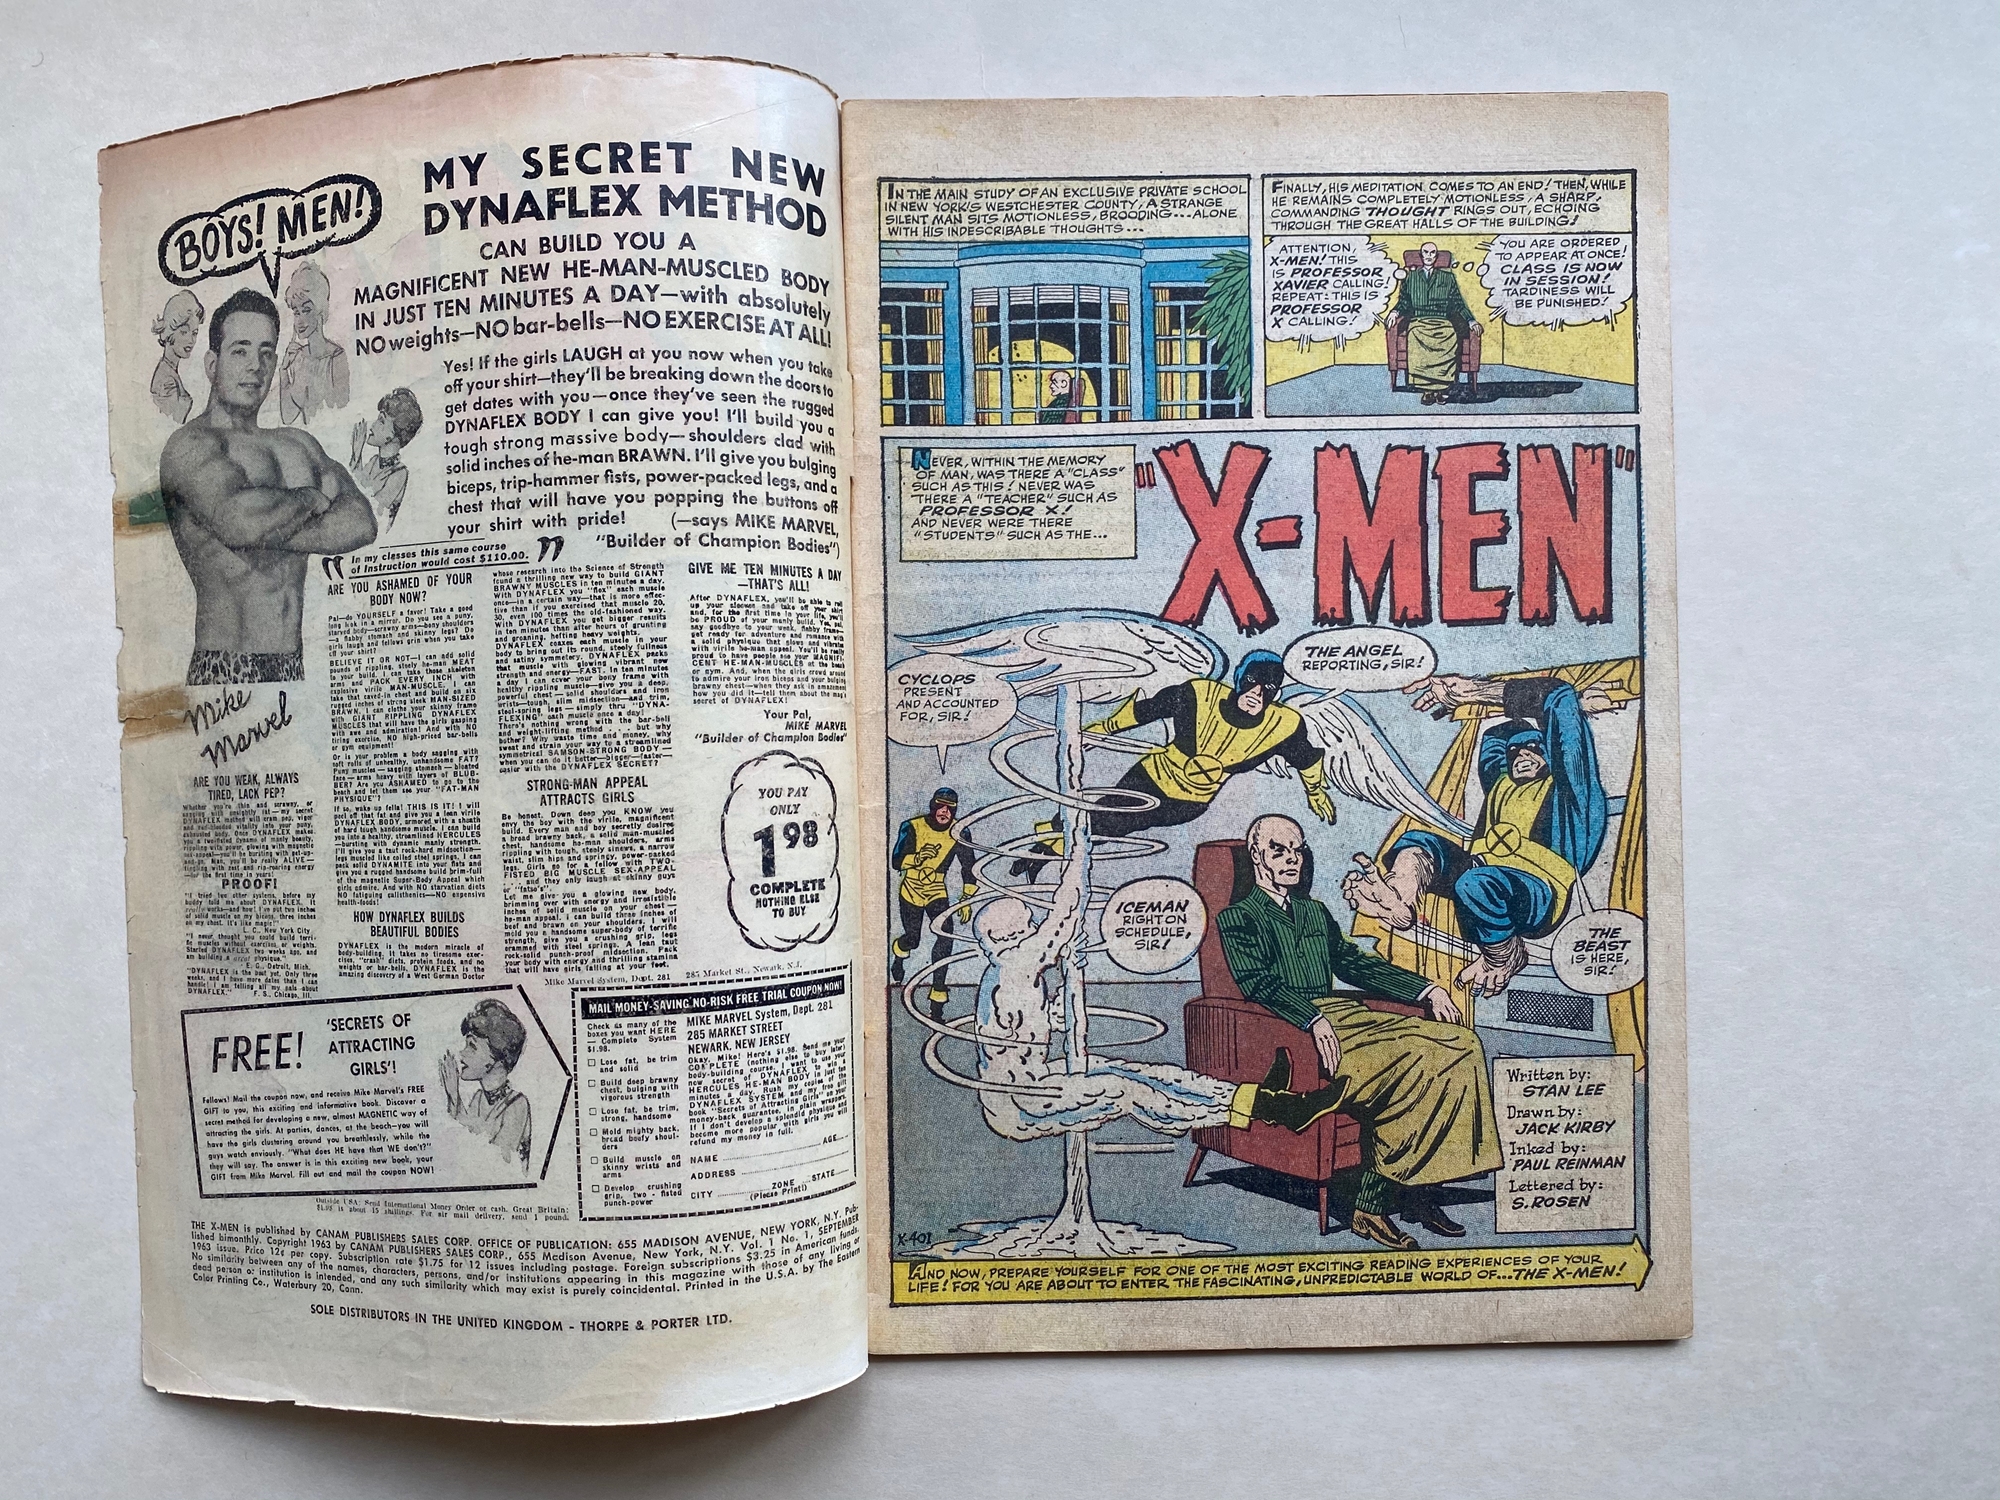 UNCANNY X-MEN #1 - (1963 - MARVEL - Pence Copy) - One of the most important Marvel Silver Age keys - - Image 5 of 9